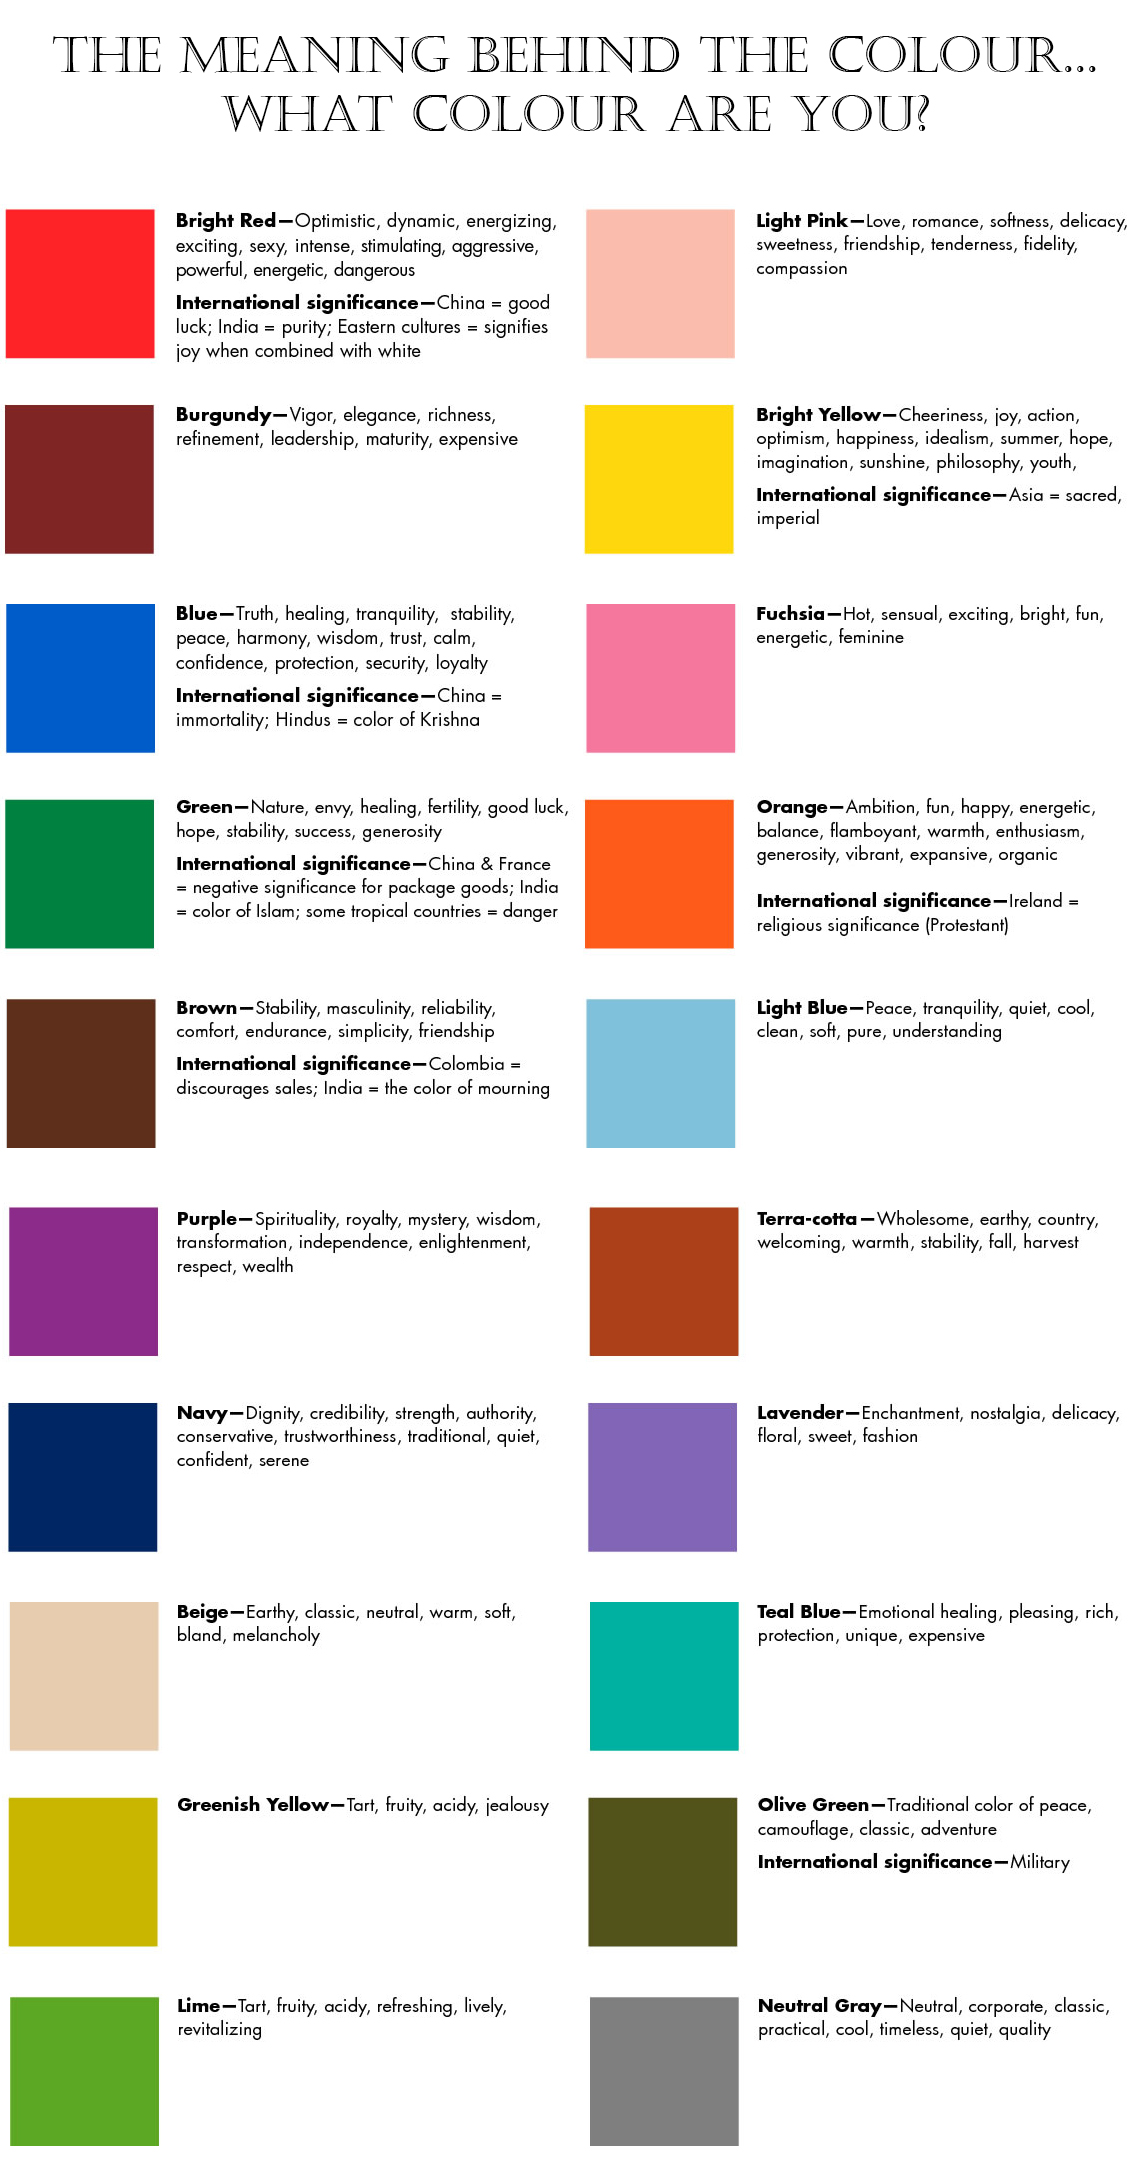 The-meaning-behind-the-colour-01.jpg